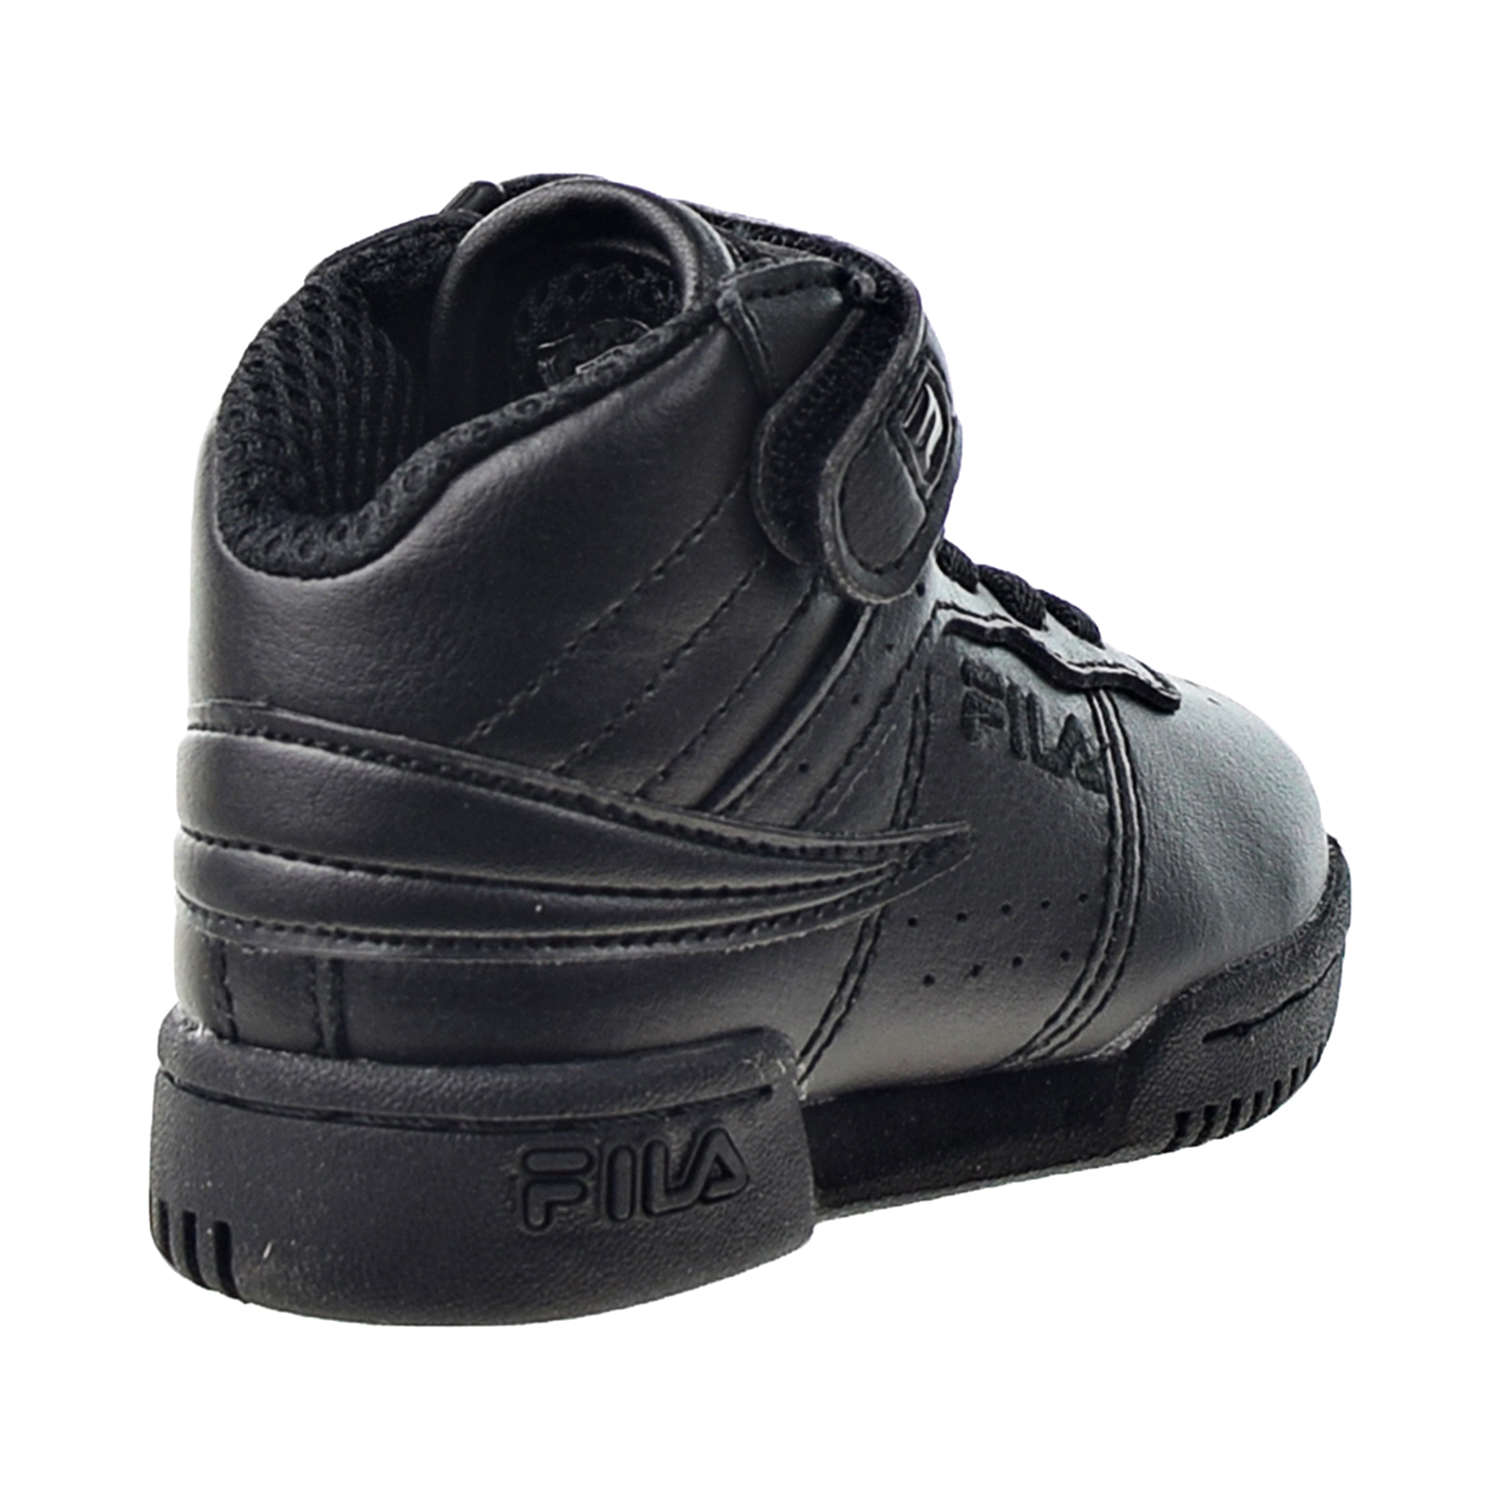 Fila F-13 Toddlers' Shoes Black 7vf80117-001